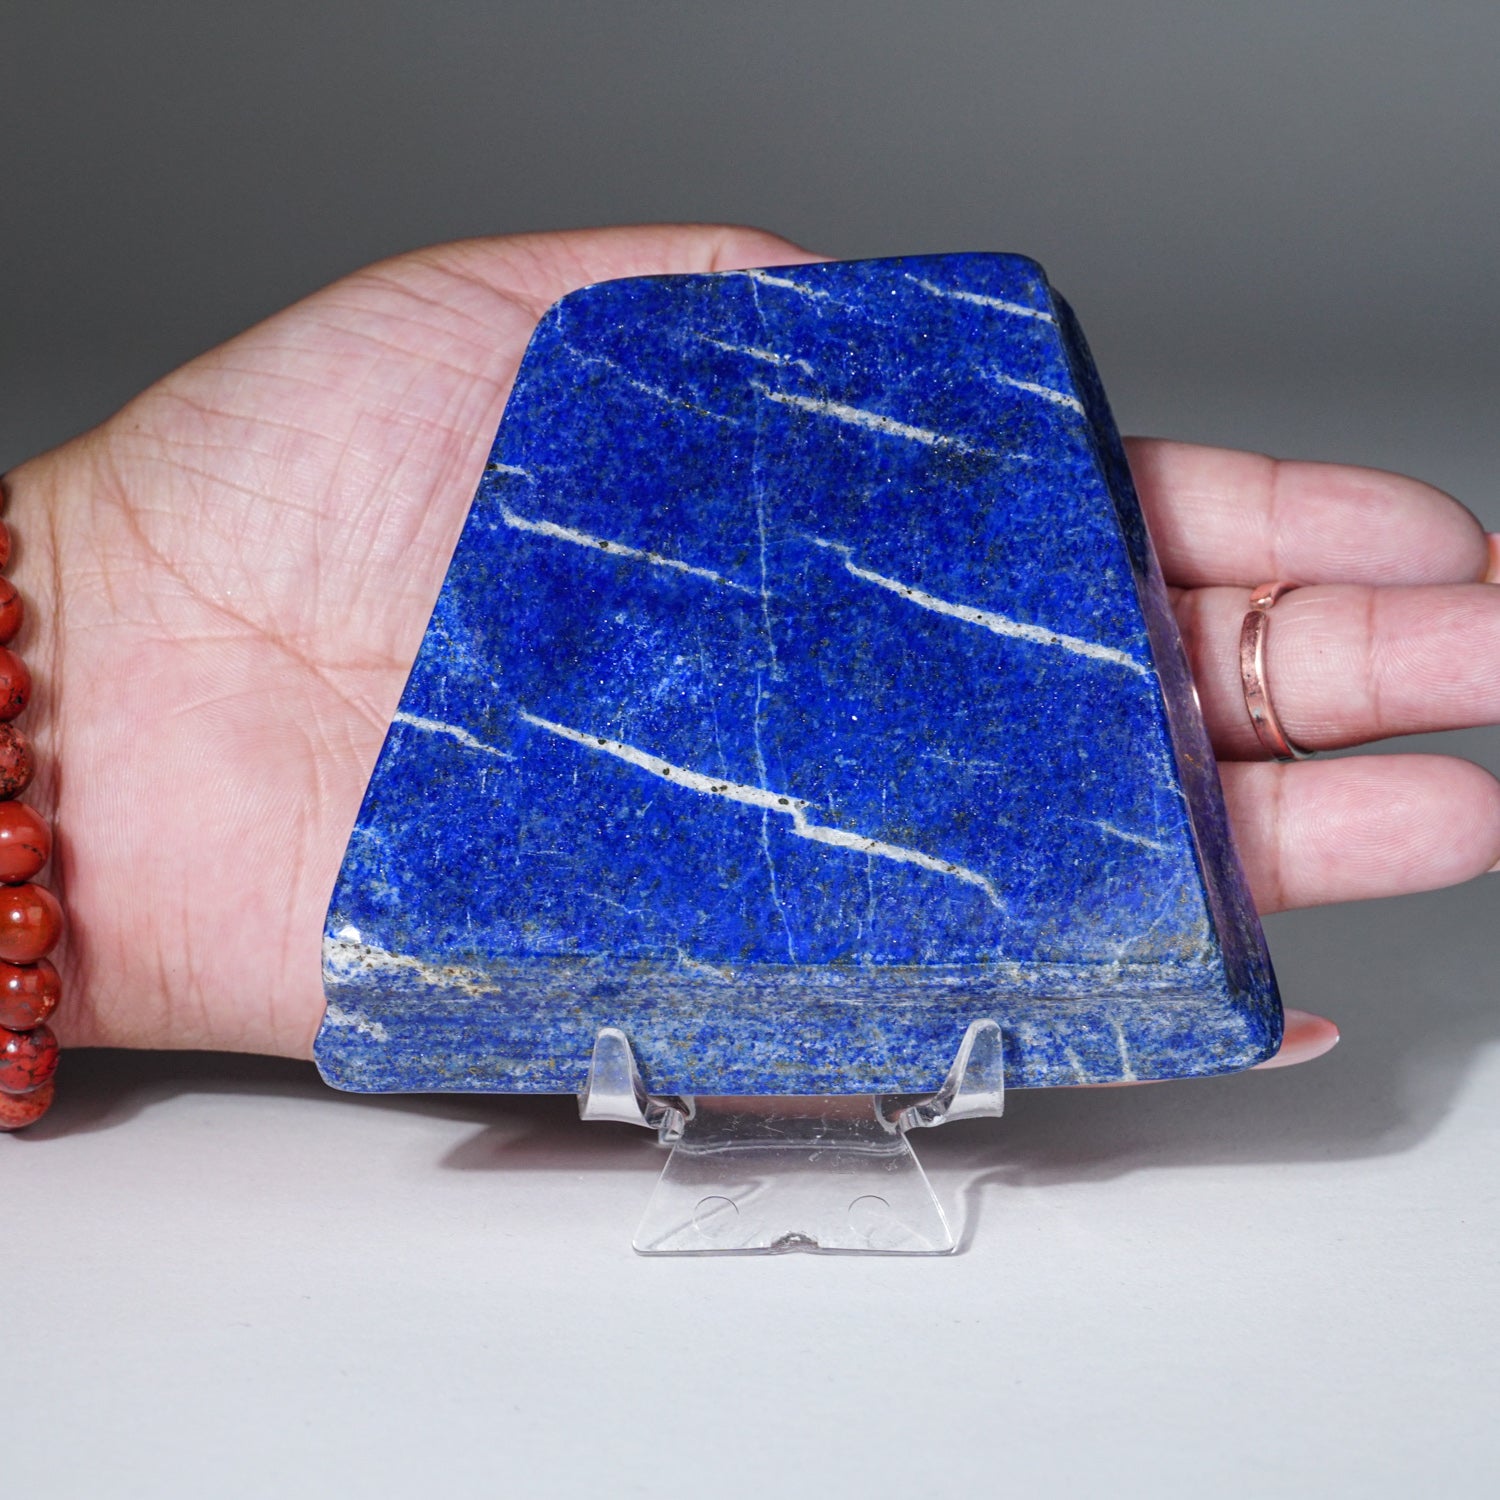 Polished Lapis Lazuli Freeform from Afghanistan (325.4 grams)